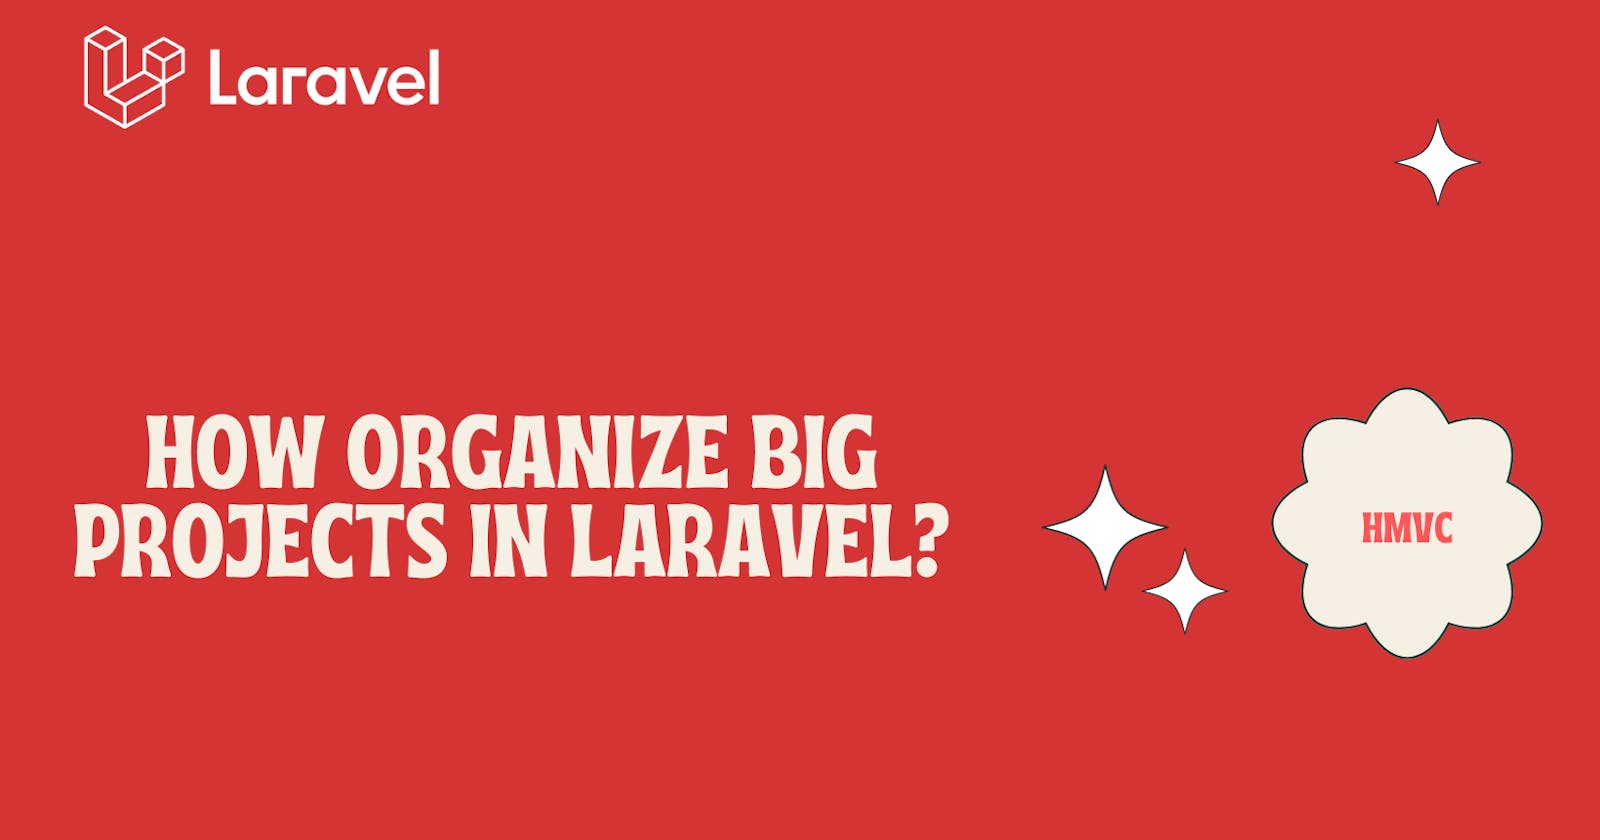 How organize big projects in Laravel?